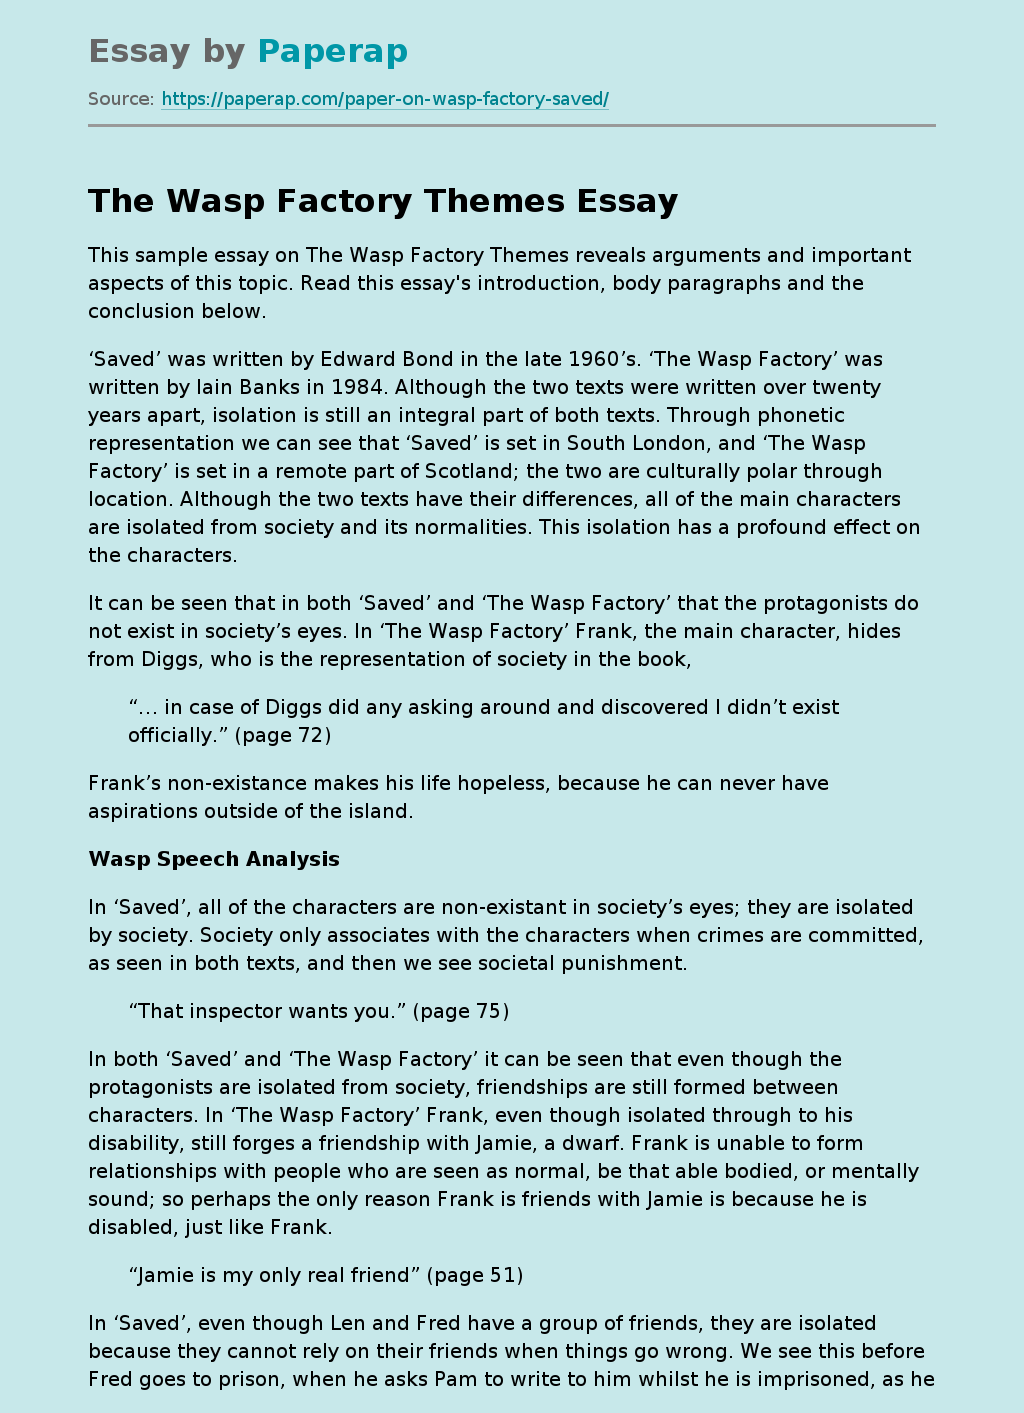 The Wasp Factory Themes